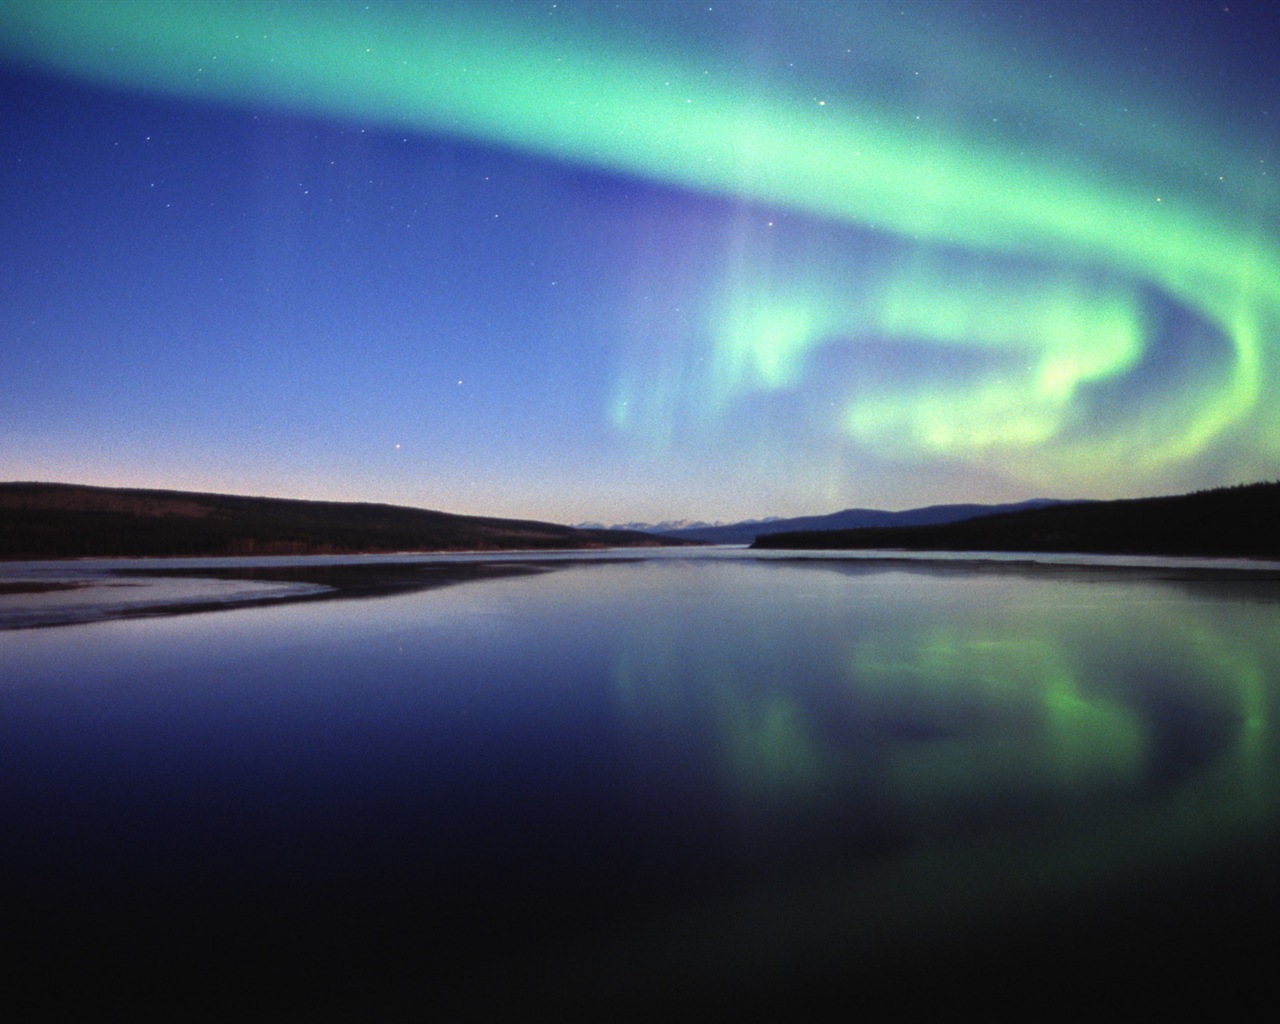 Natural wonders of the Northern Lights HD Wallpaper (2) #15 - 1280x1024